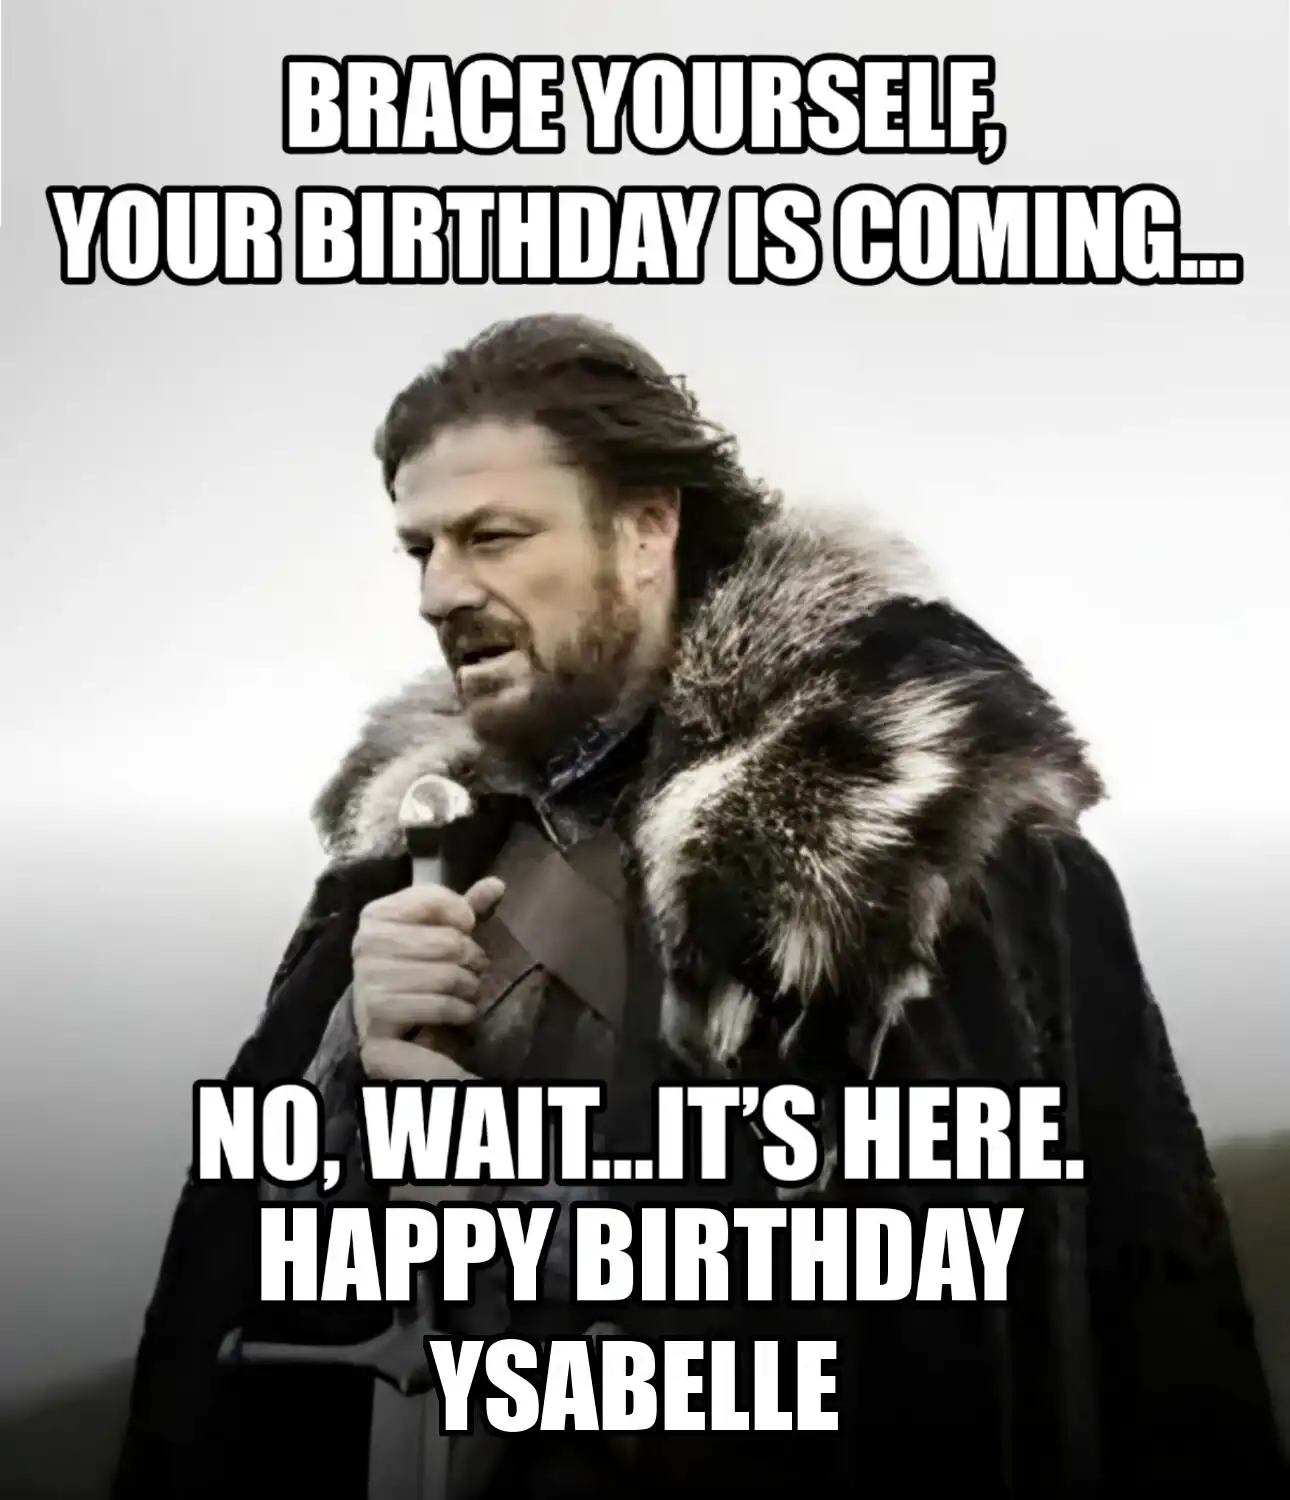 Happy Birthday Ysabelle Brace Yourself Your Birthday Is Coming Meme